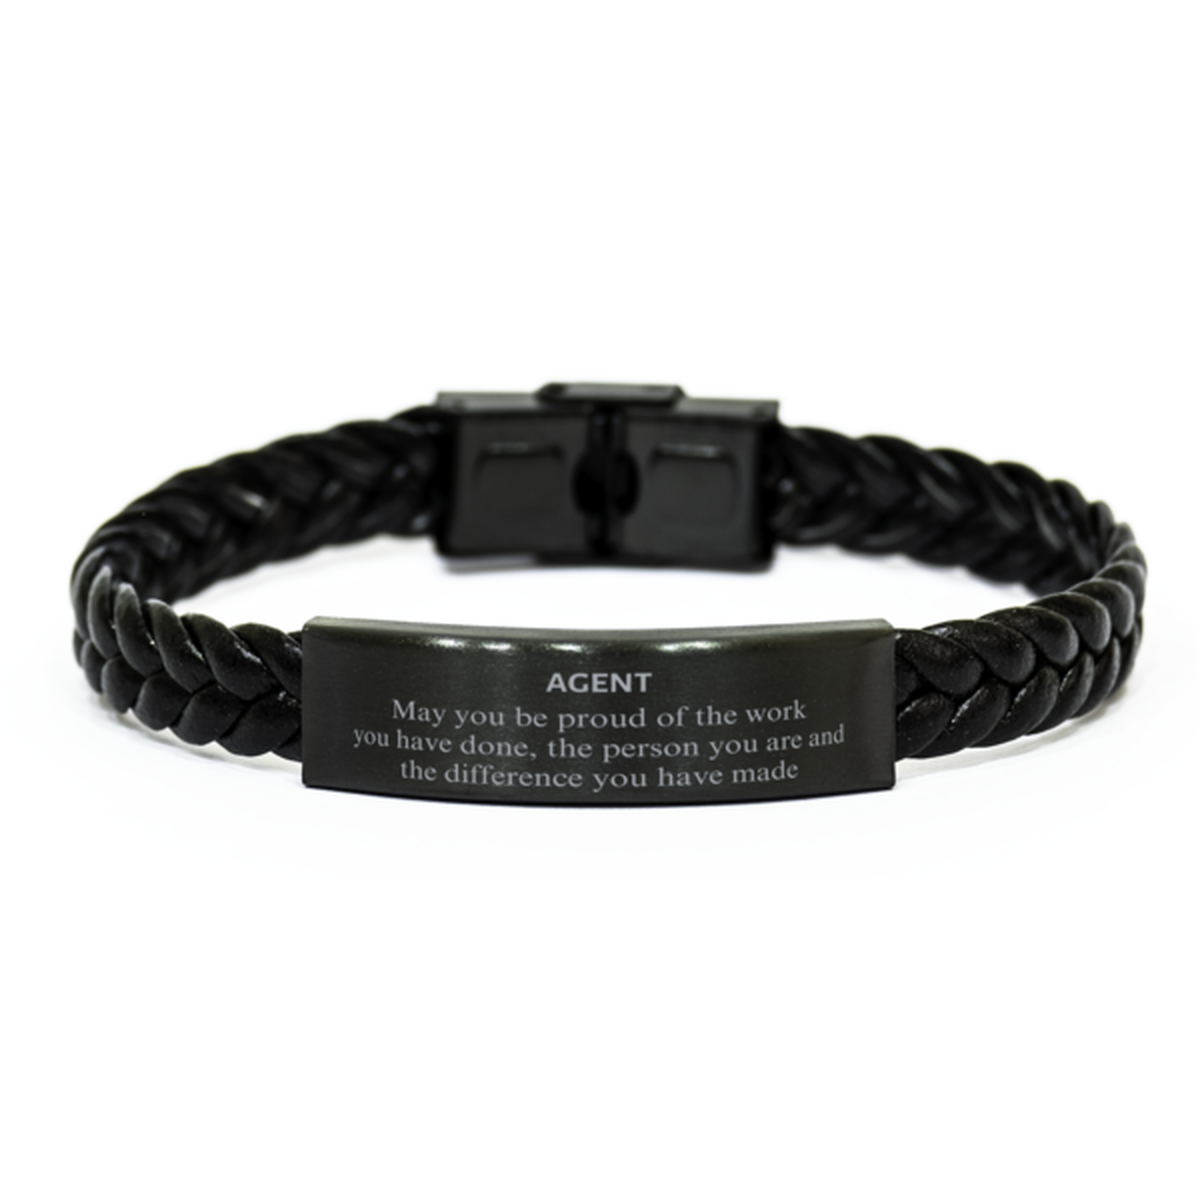 Agent May you be proud of the work you have done, Retirement Agent Braided Leather Bracelet for Colleague Appreciation Gifts Amazing for Agent